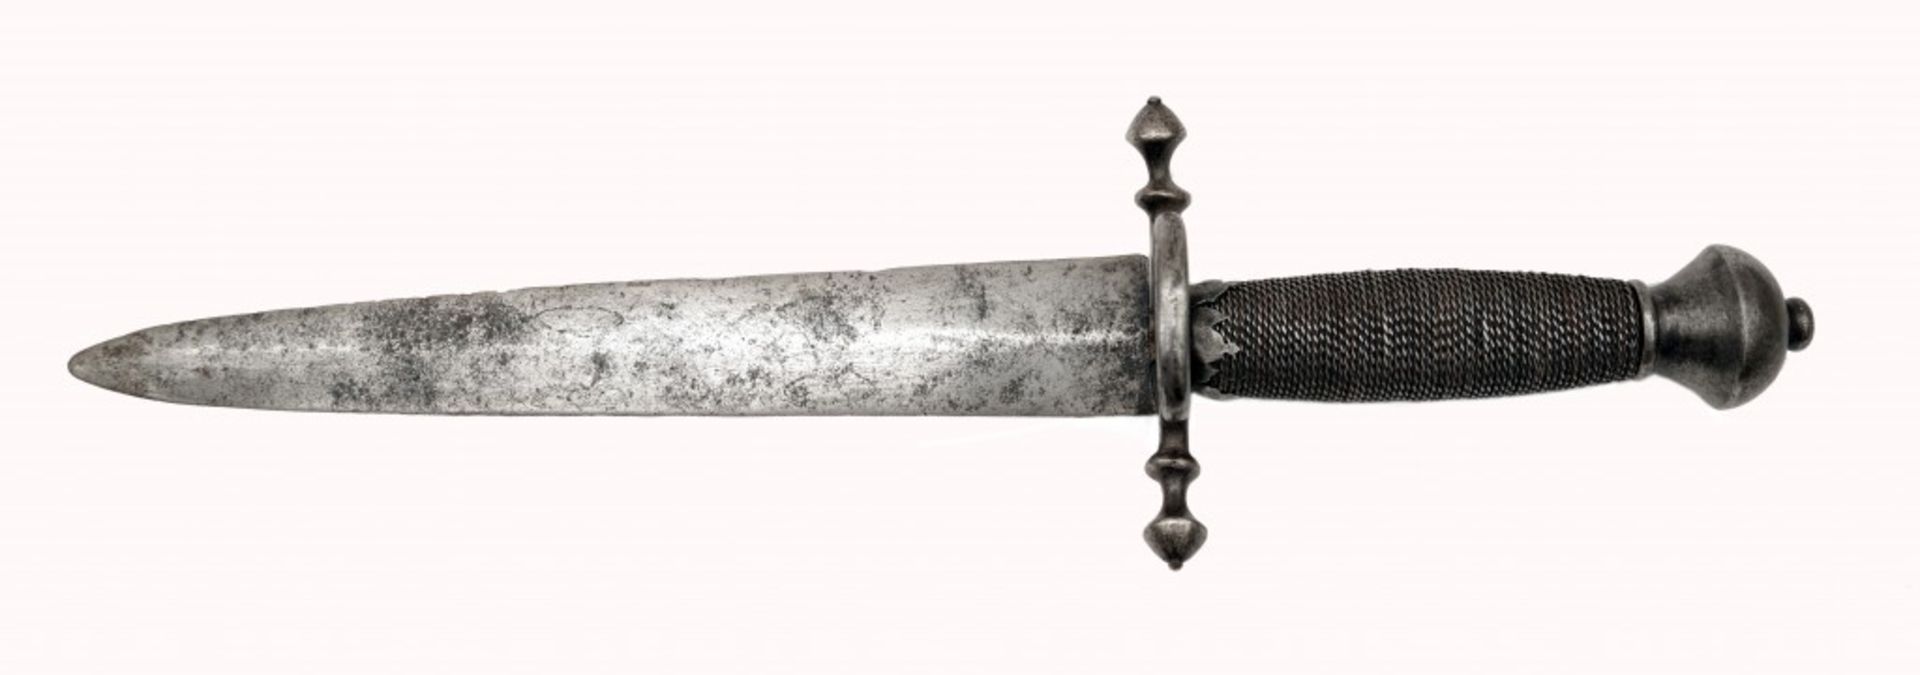 A Left-handed Dagger in Style of the 17th century - Image 2 of 2